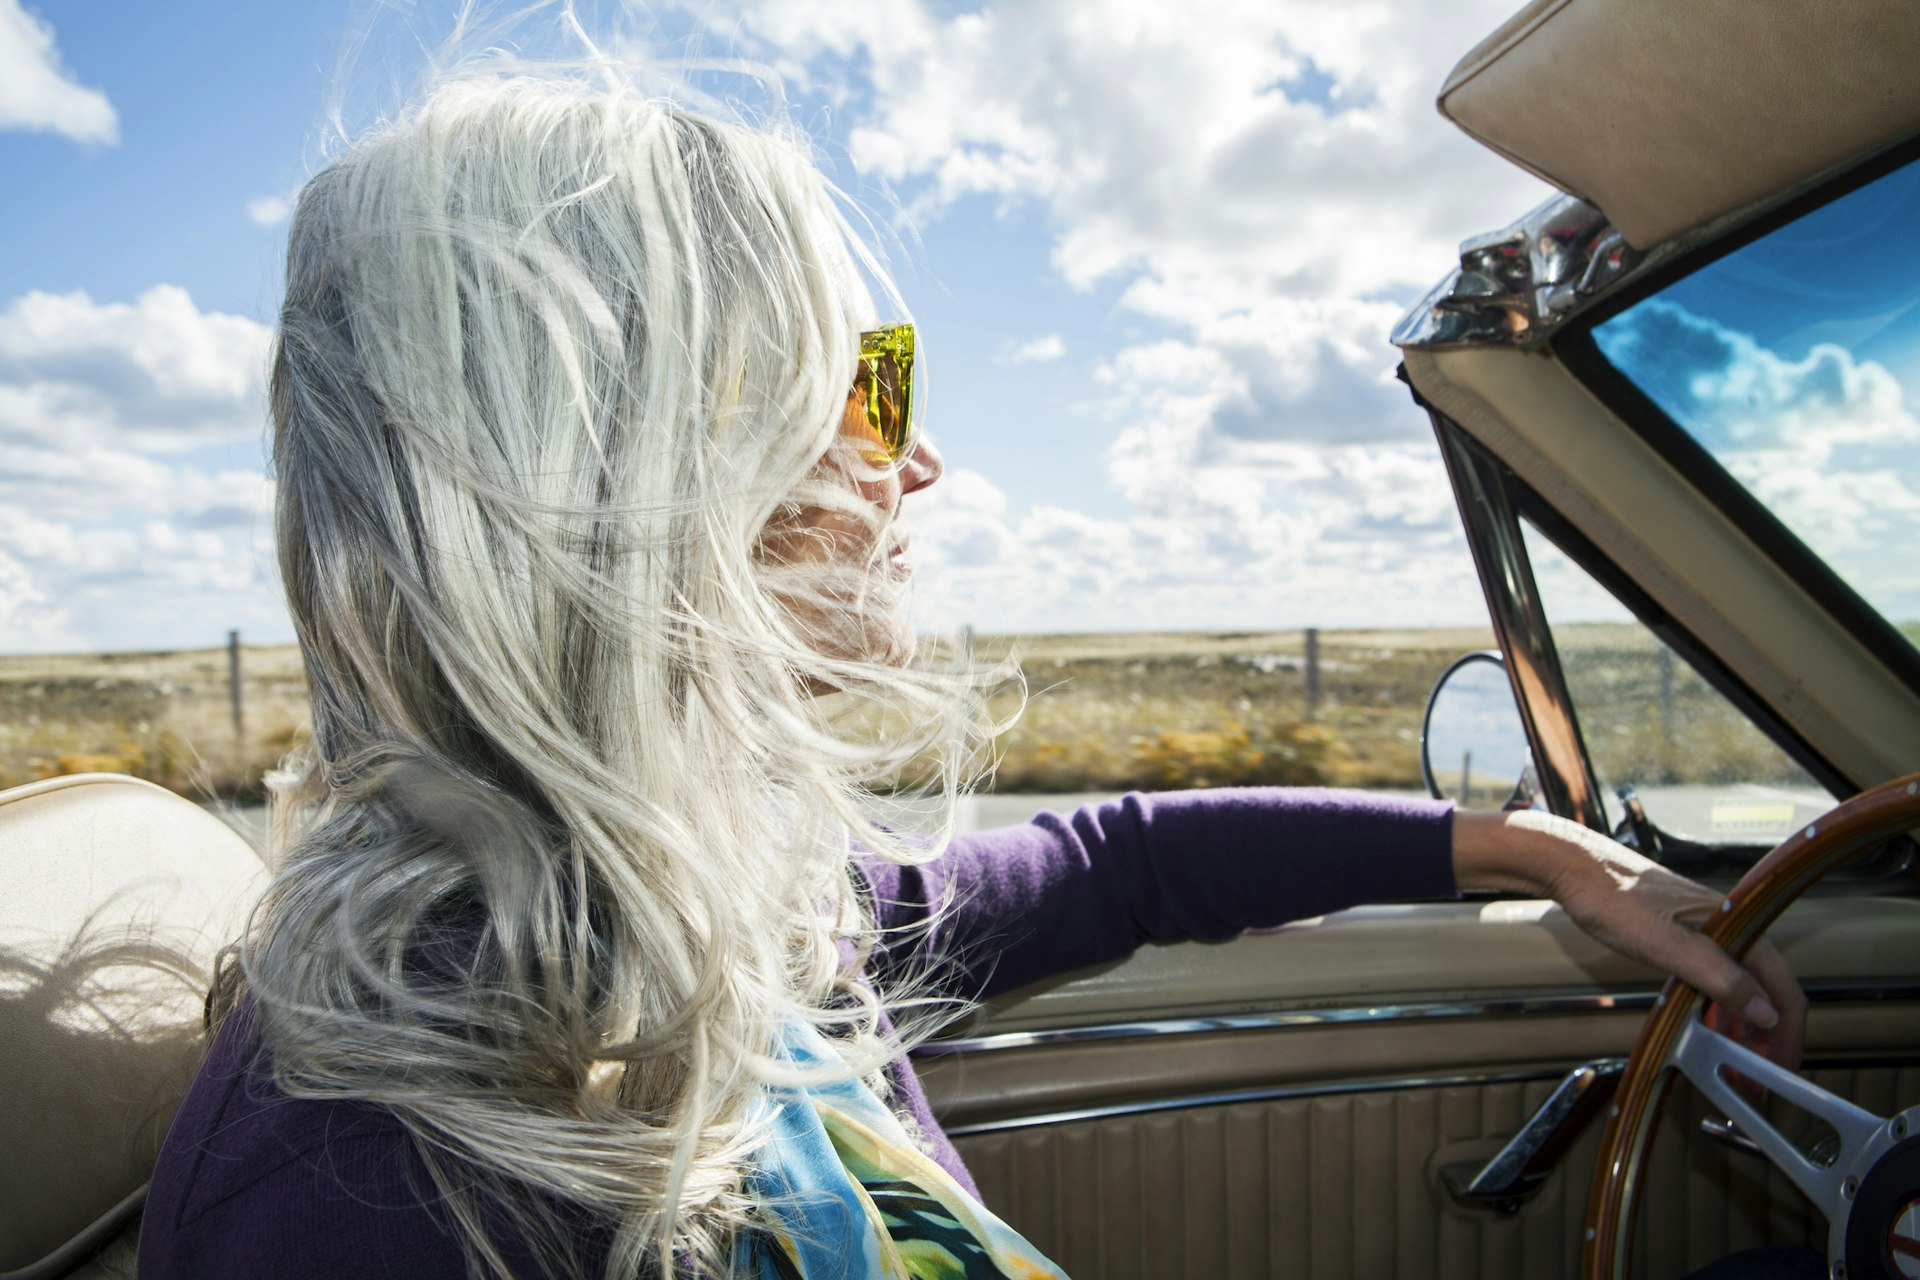 Woman from the baby boomer generation driving in an antique convertible car on a sunny fall day with her long, silver gray hair blowing in the wind